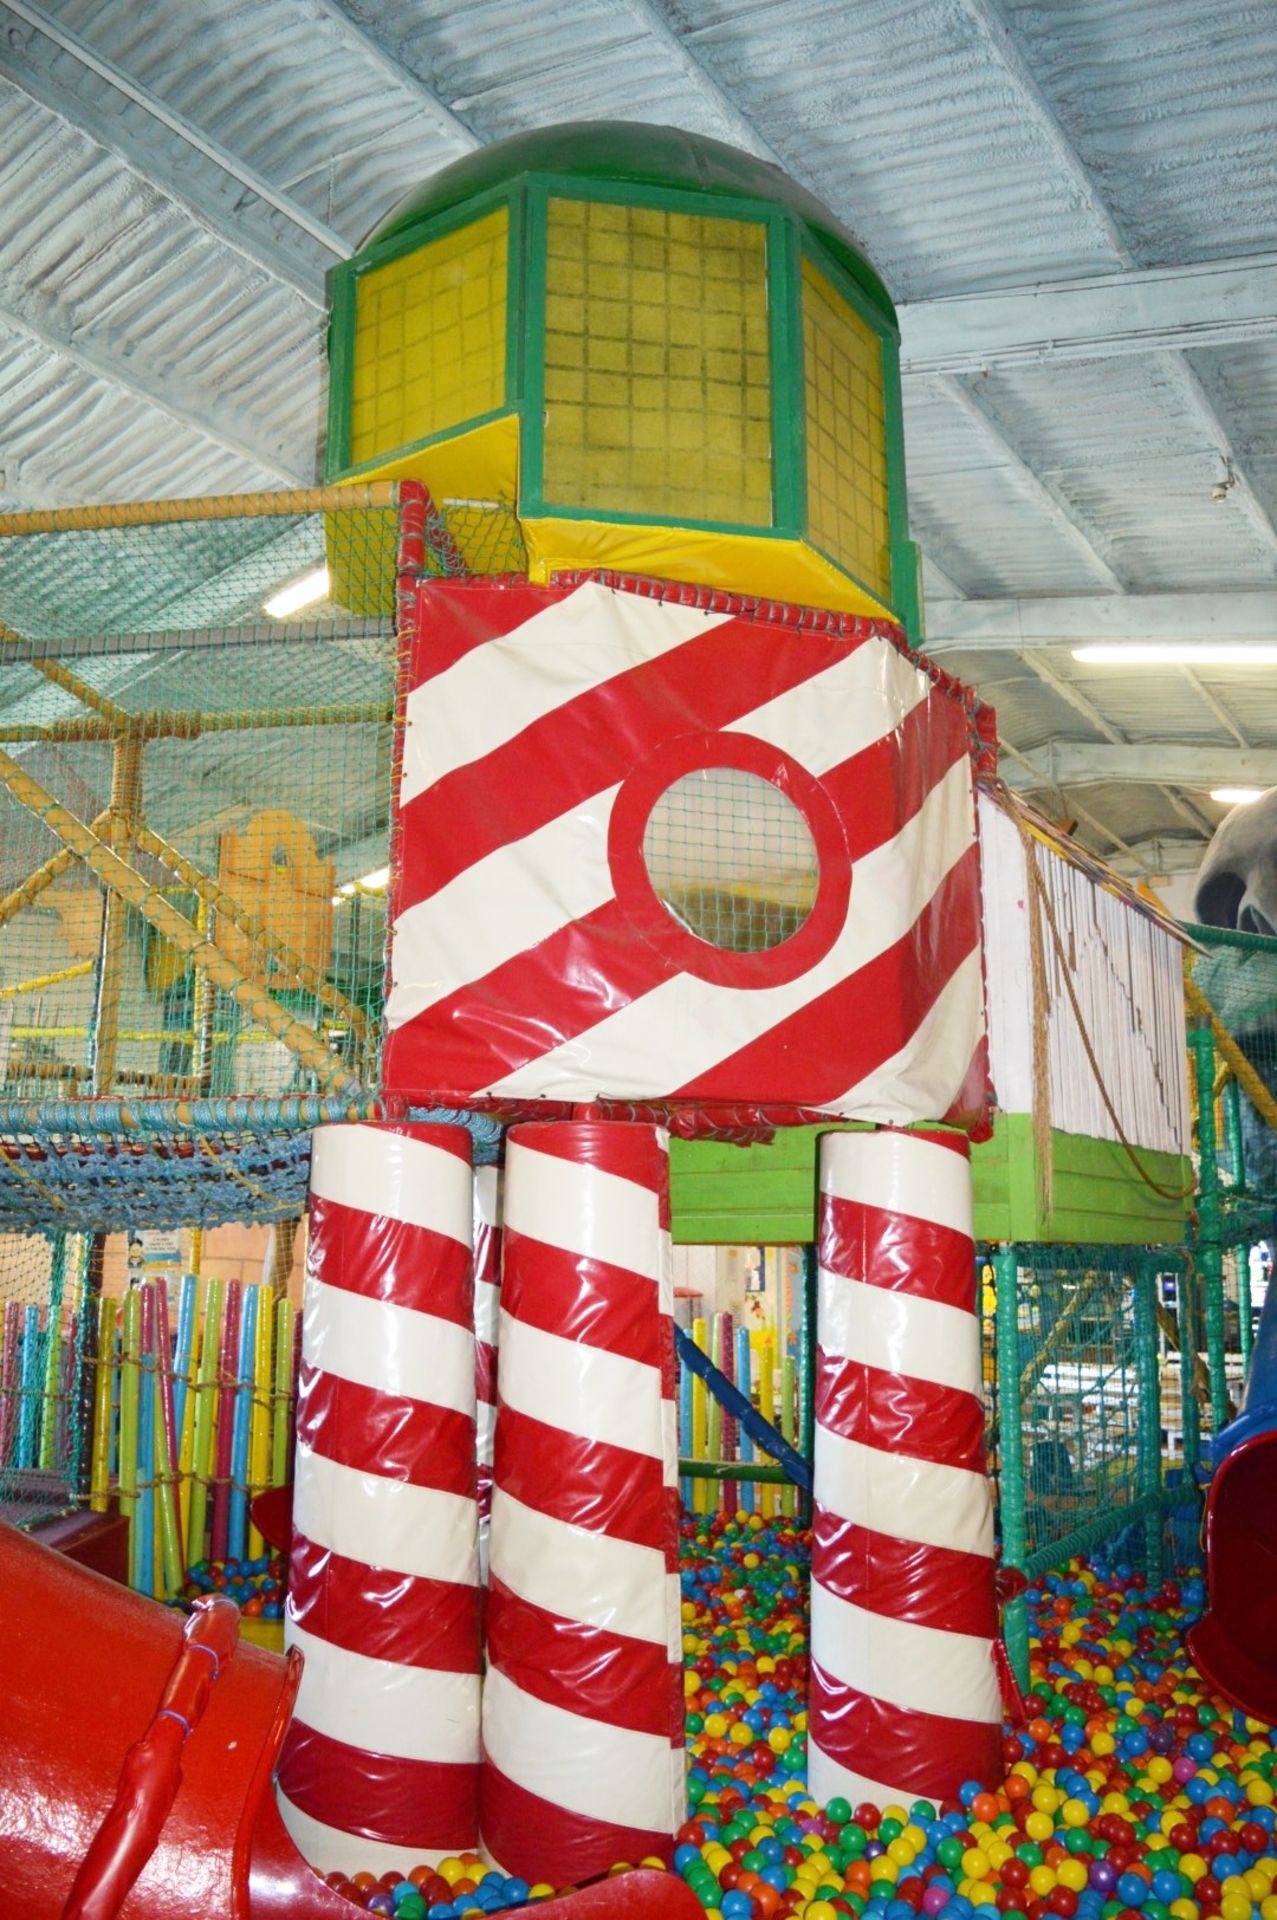 1 x Large Amount of Playcentre Safety Padding and Netting - Includes Lots of Various Designs and